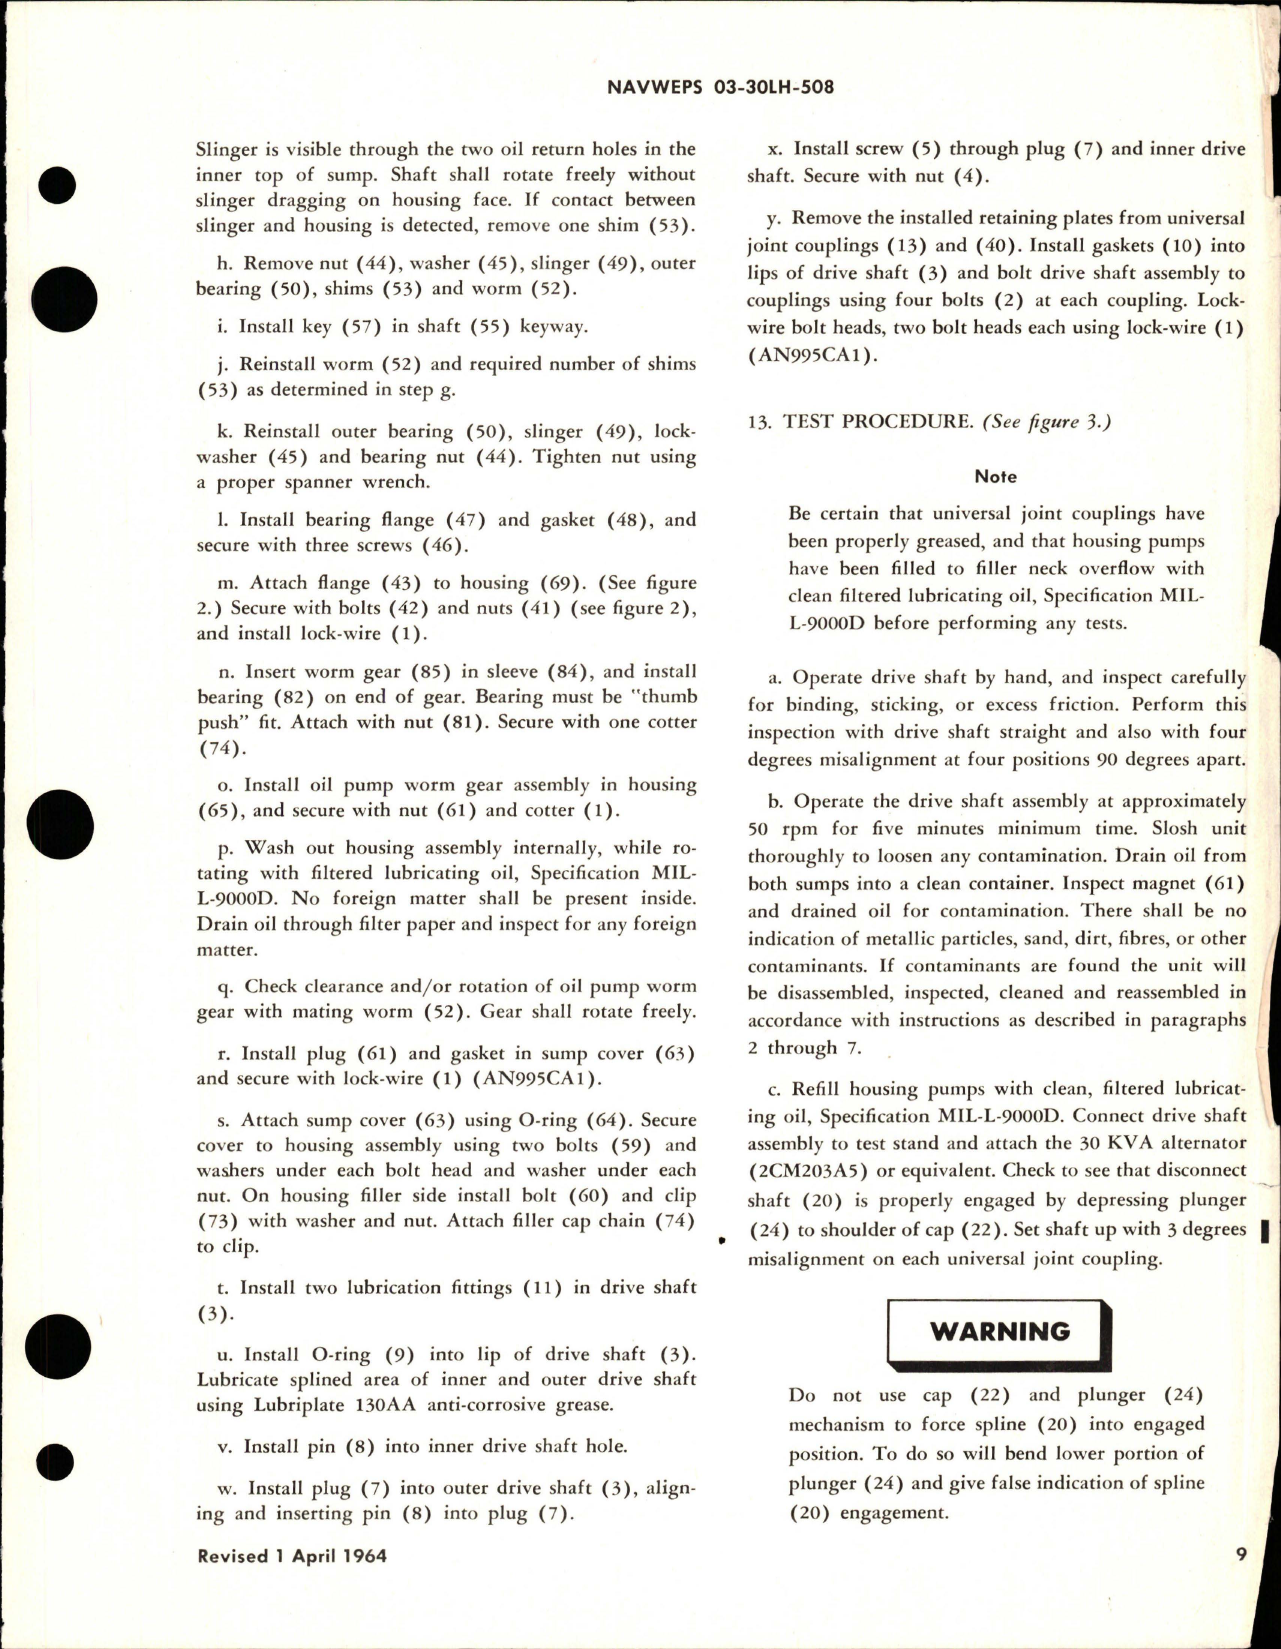 Sample page 5 from AirCorps Library document: Overhaul Instructions with Parts Breakdown for Drive Shaft & Disconnect Assembly - 30 KVA Alternator - Part 438351